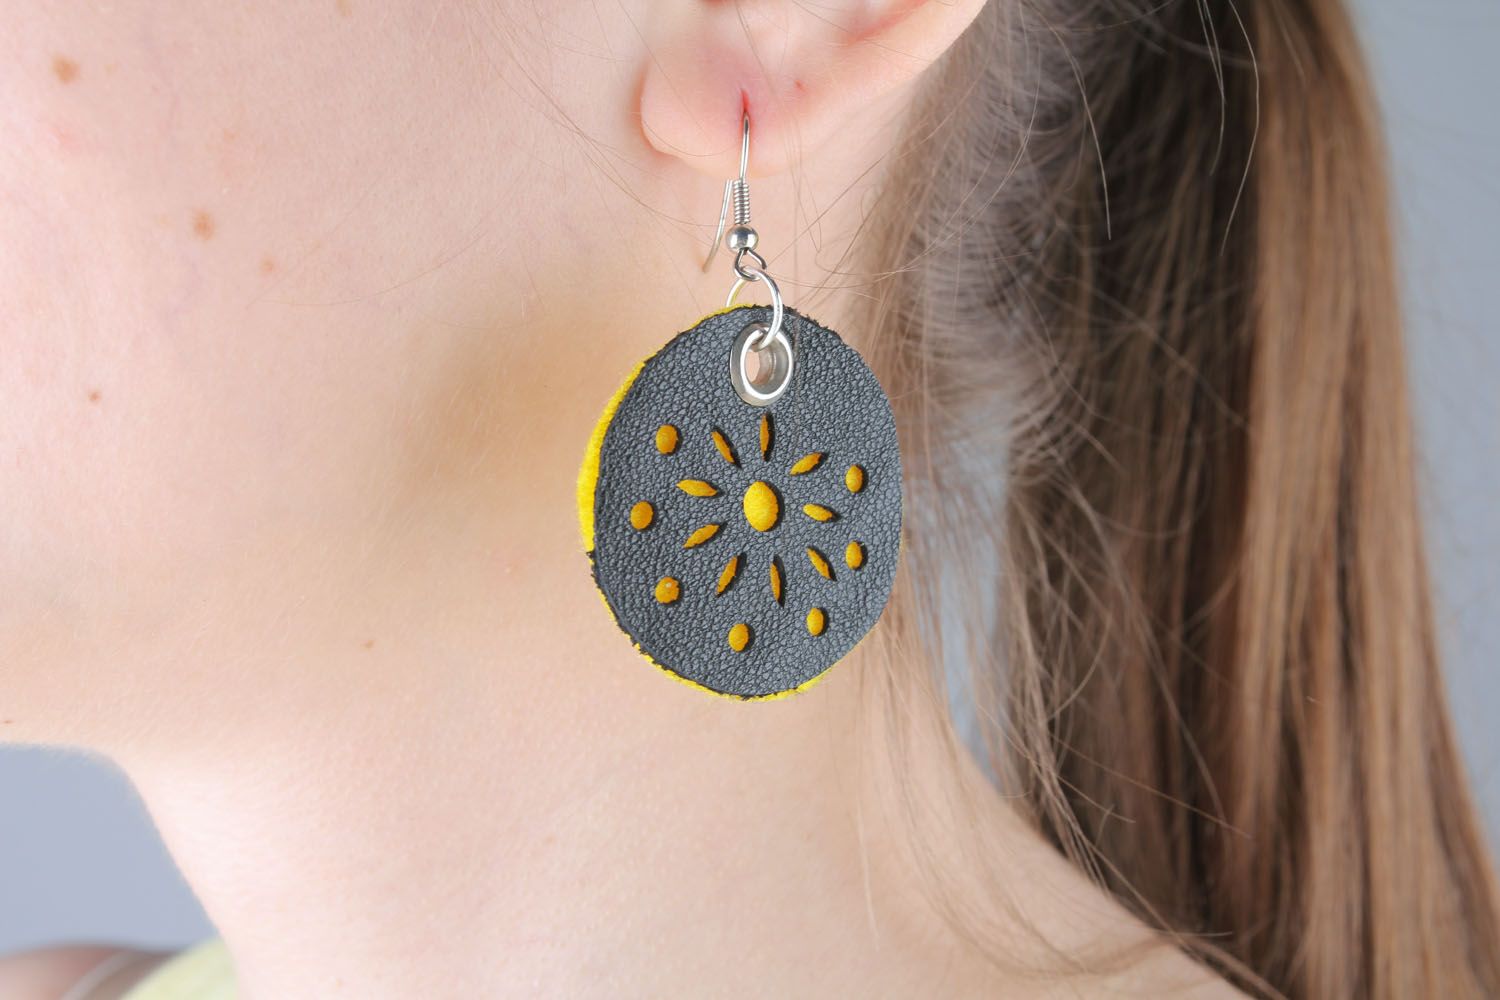 Women's earrings made of leather and felt photo 5